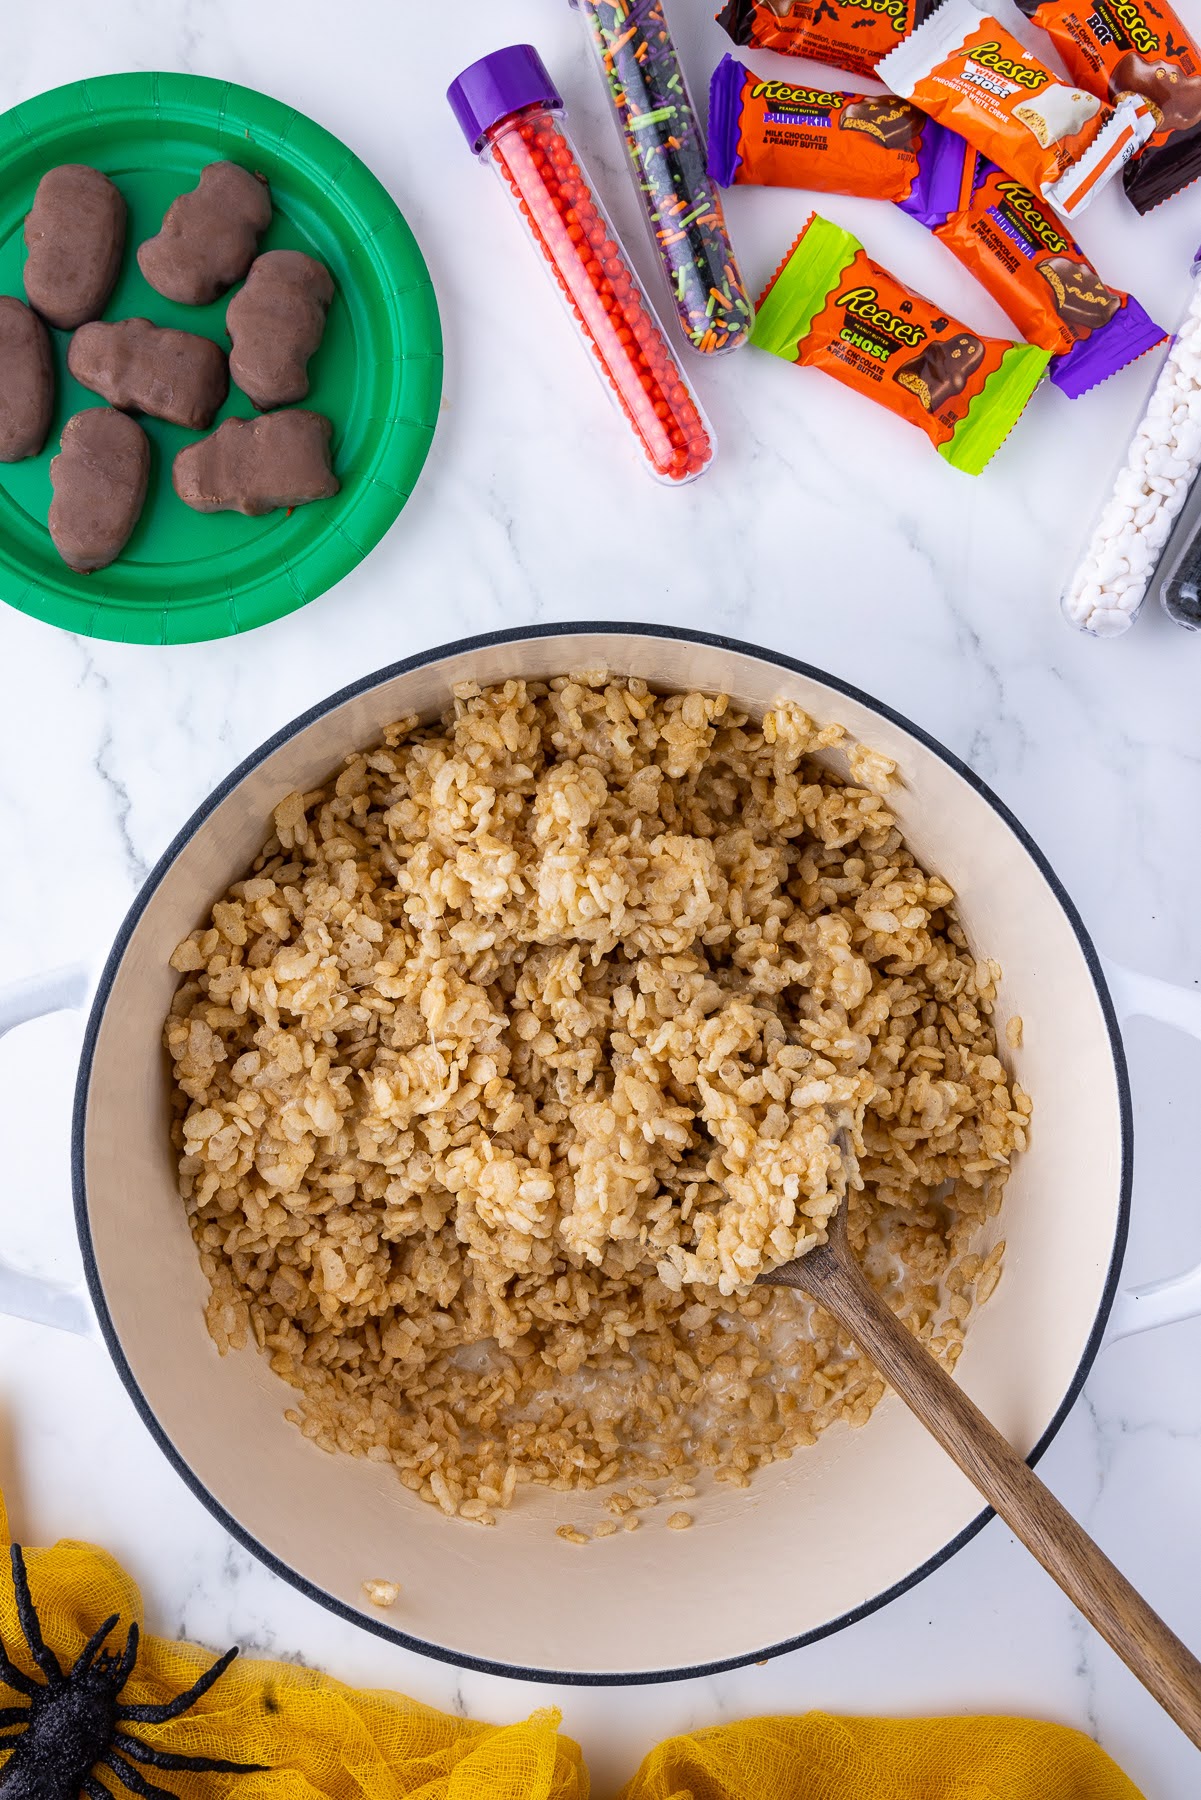 pot of rice crispies with a wooden spoon and wrapped chocolates in the background